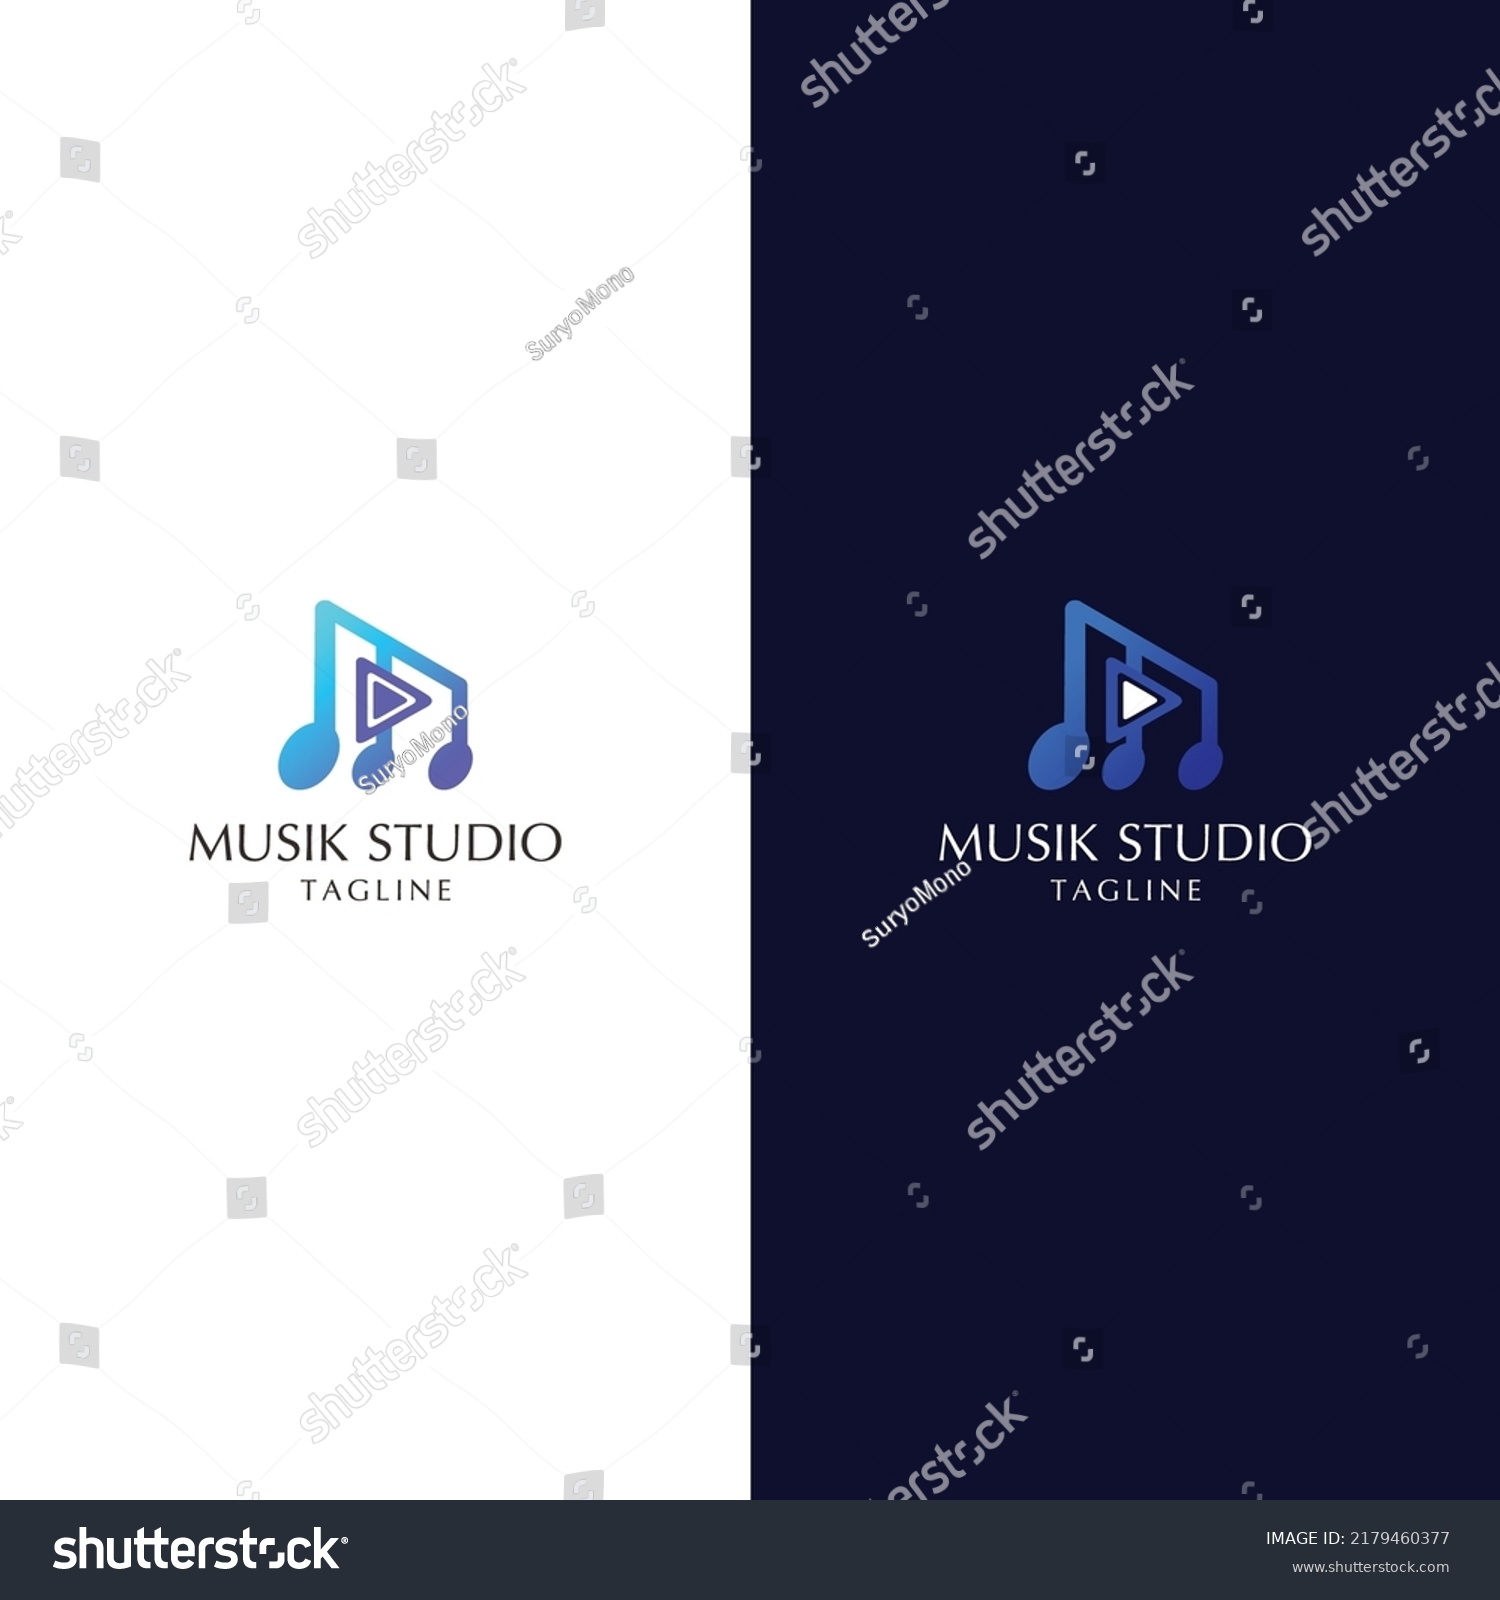 350 Icons musik Images, Stock Photos & Vectors | Shutterstock